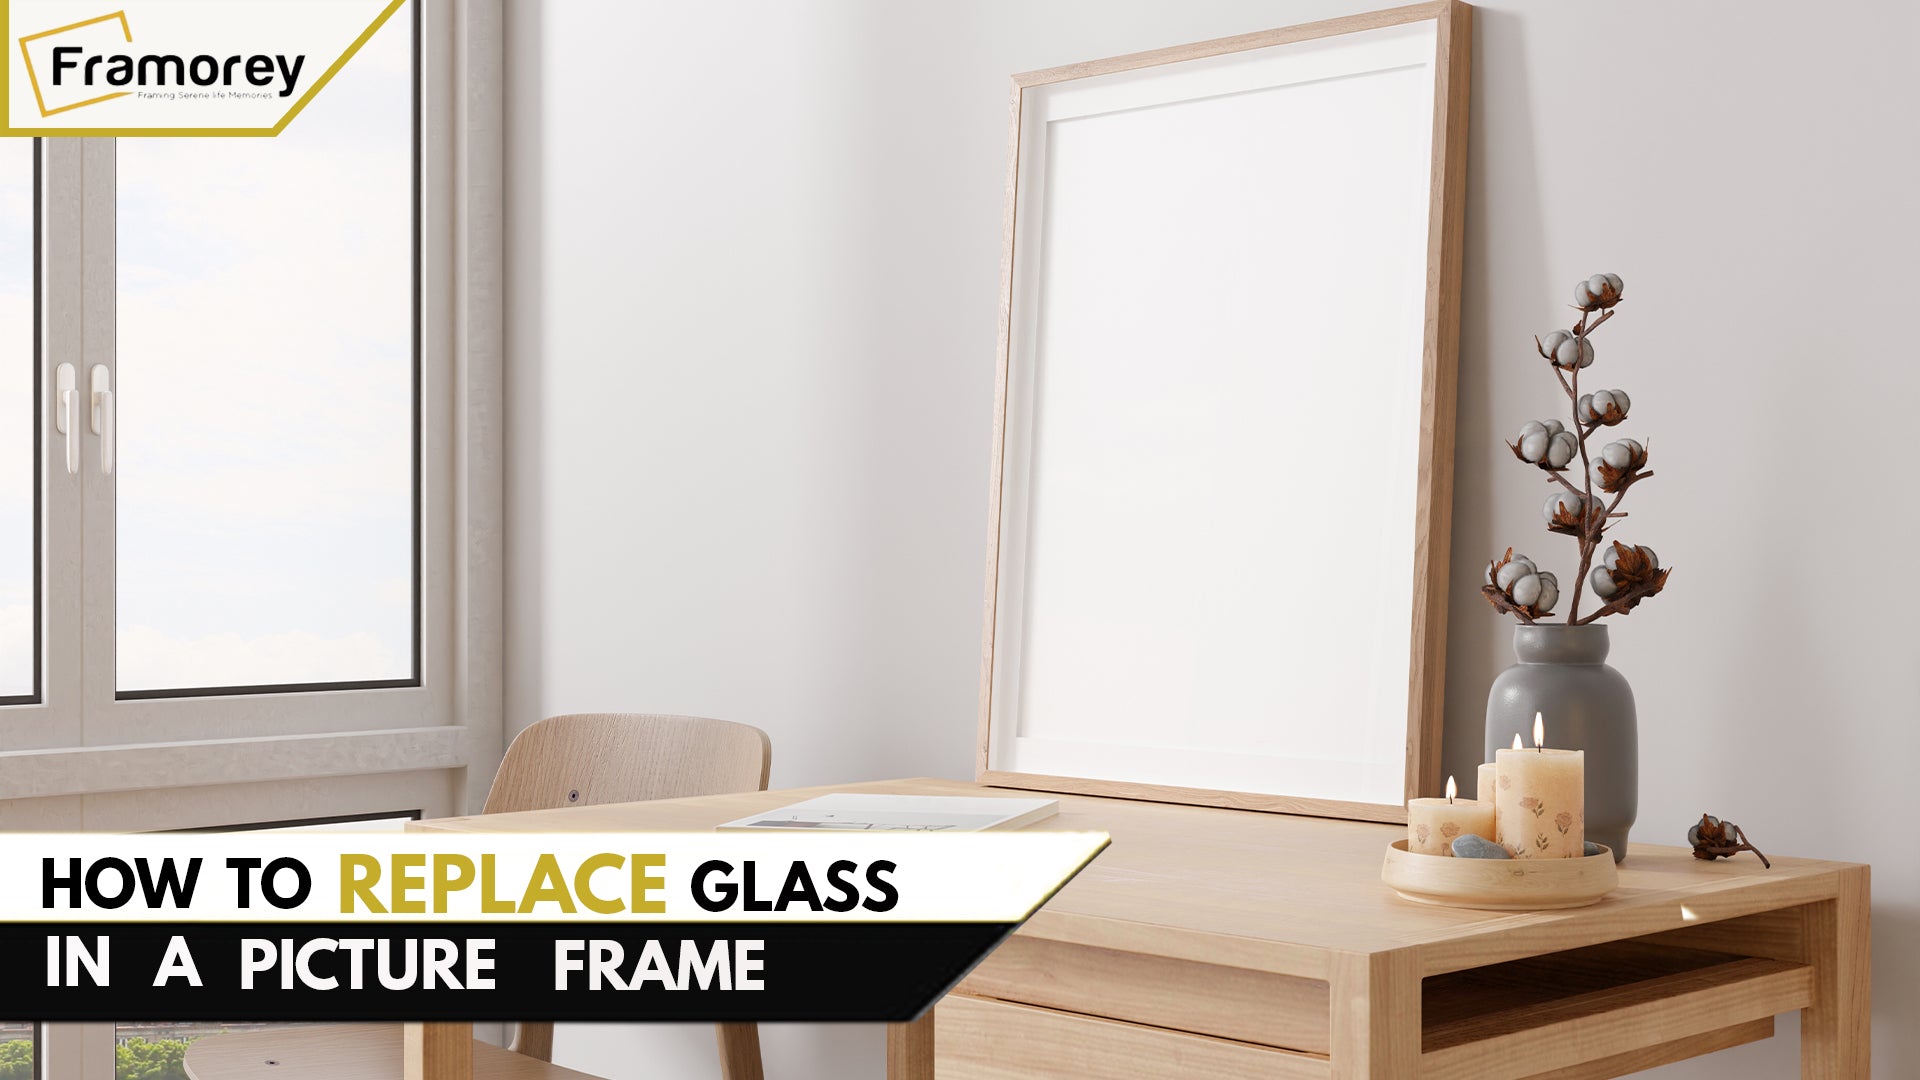 How to Replace a Glass in a Picture Frame